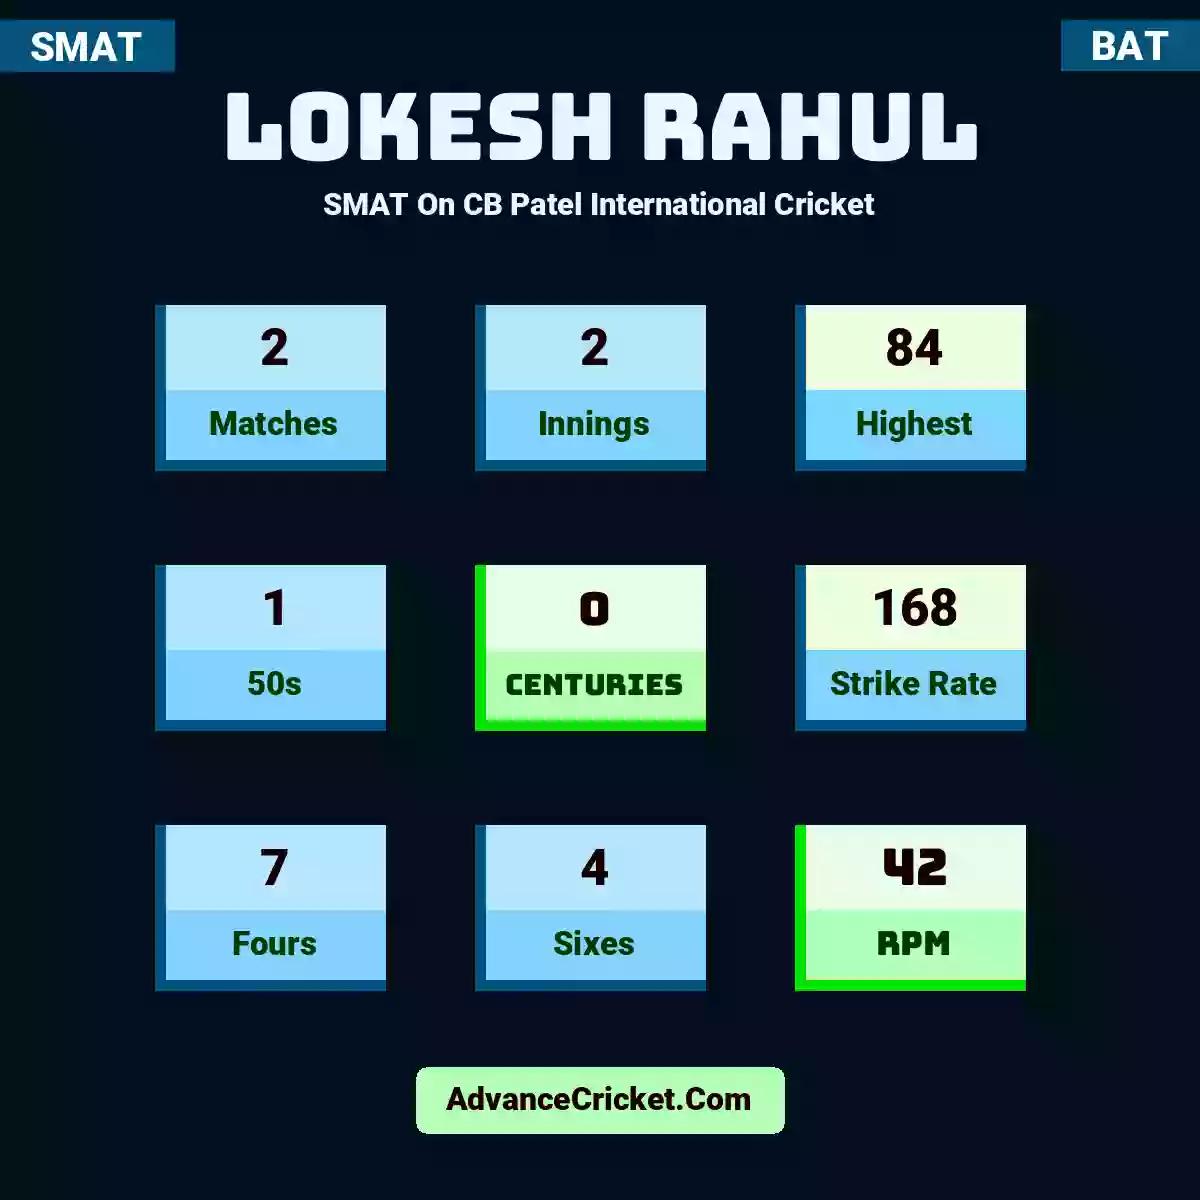 Lokesh Rahul SMAT  On CB Patel International Cricket, Lokesh Rahul played 2 matches, scored 84 runs as highest, 1 half-centuries, and 0 centuries, with a strike rate of 168. L.Rahul hit 7 fours and 4 sixes, with an RPM of 42.